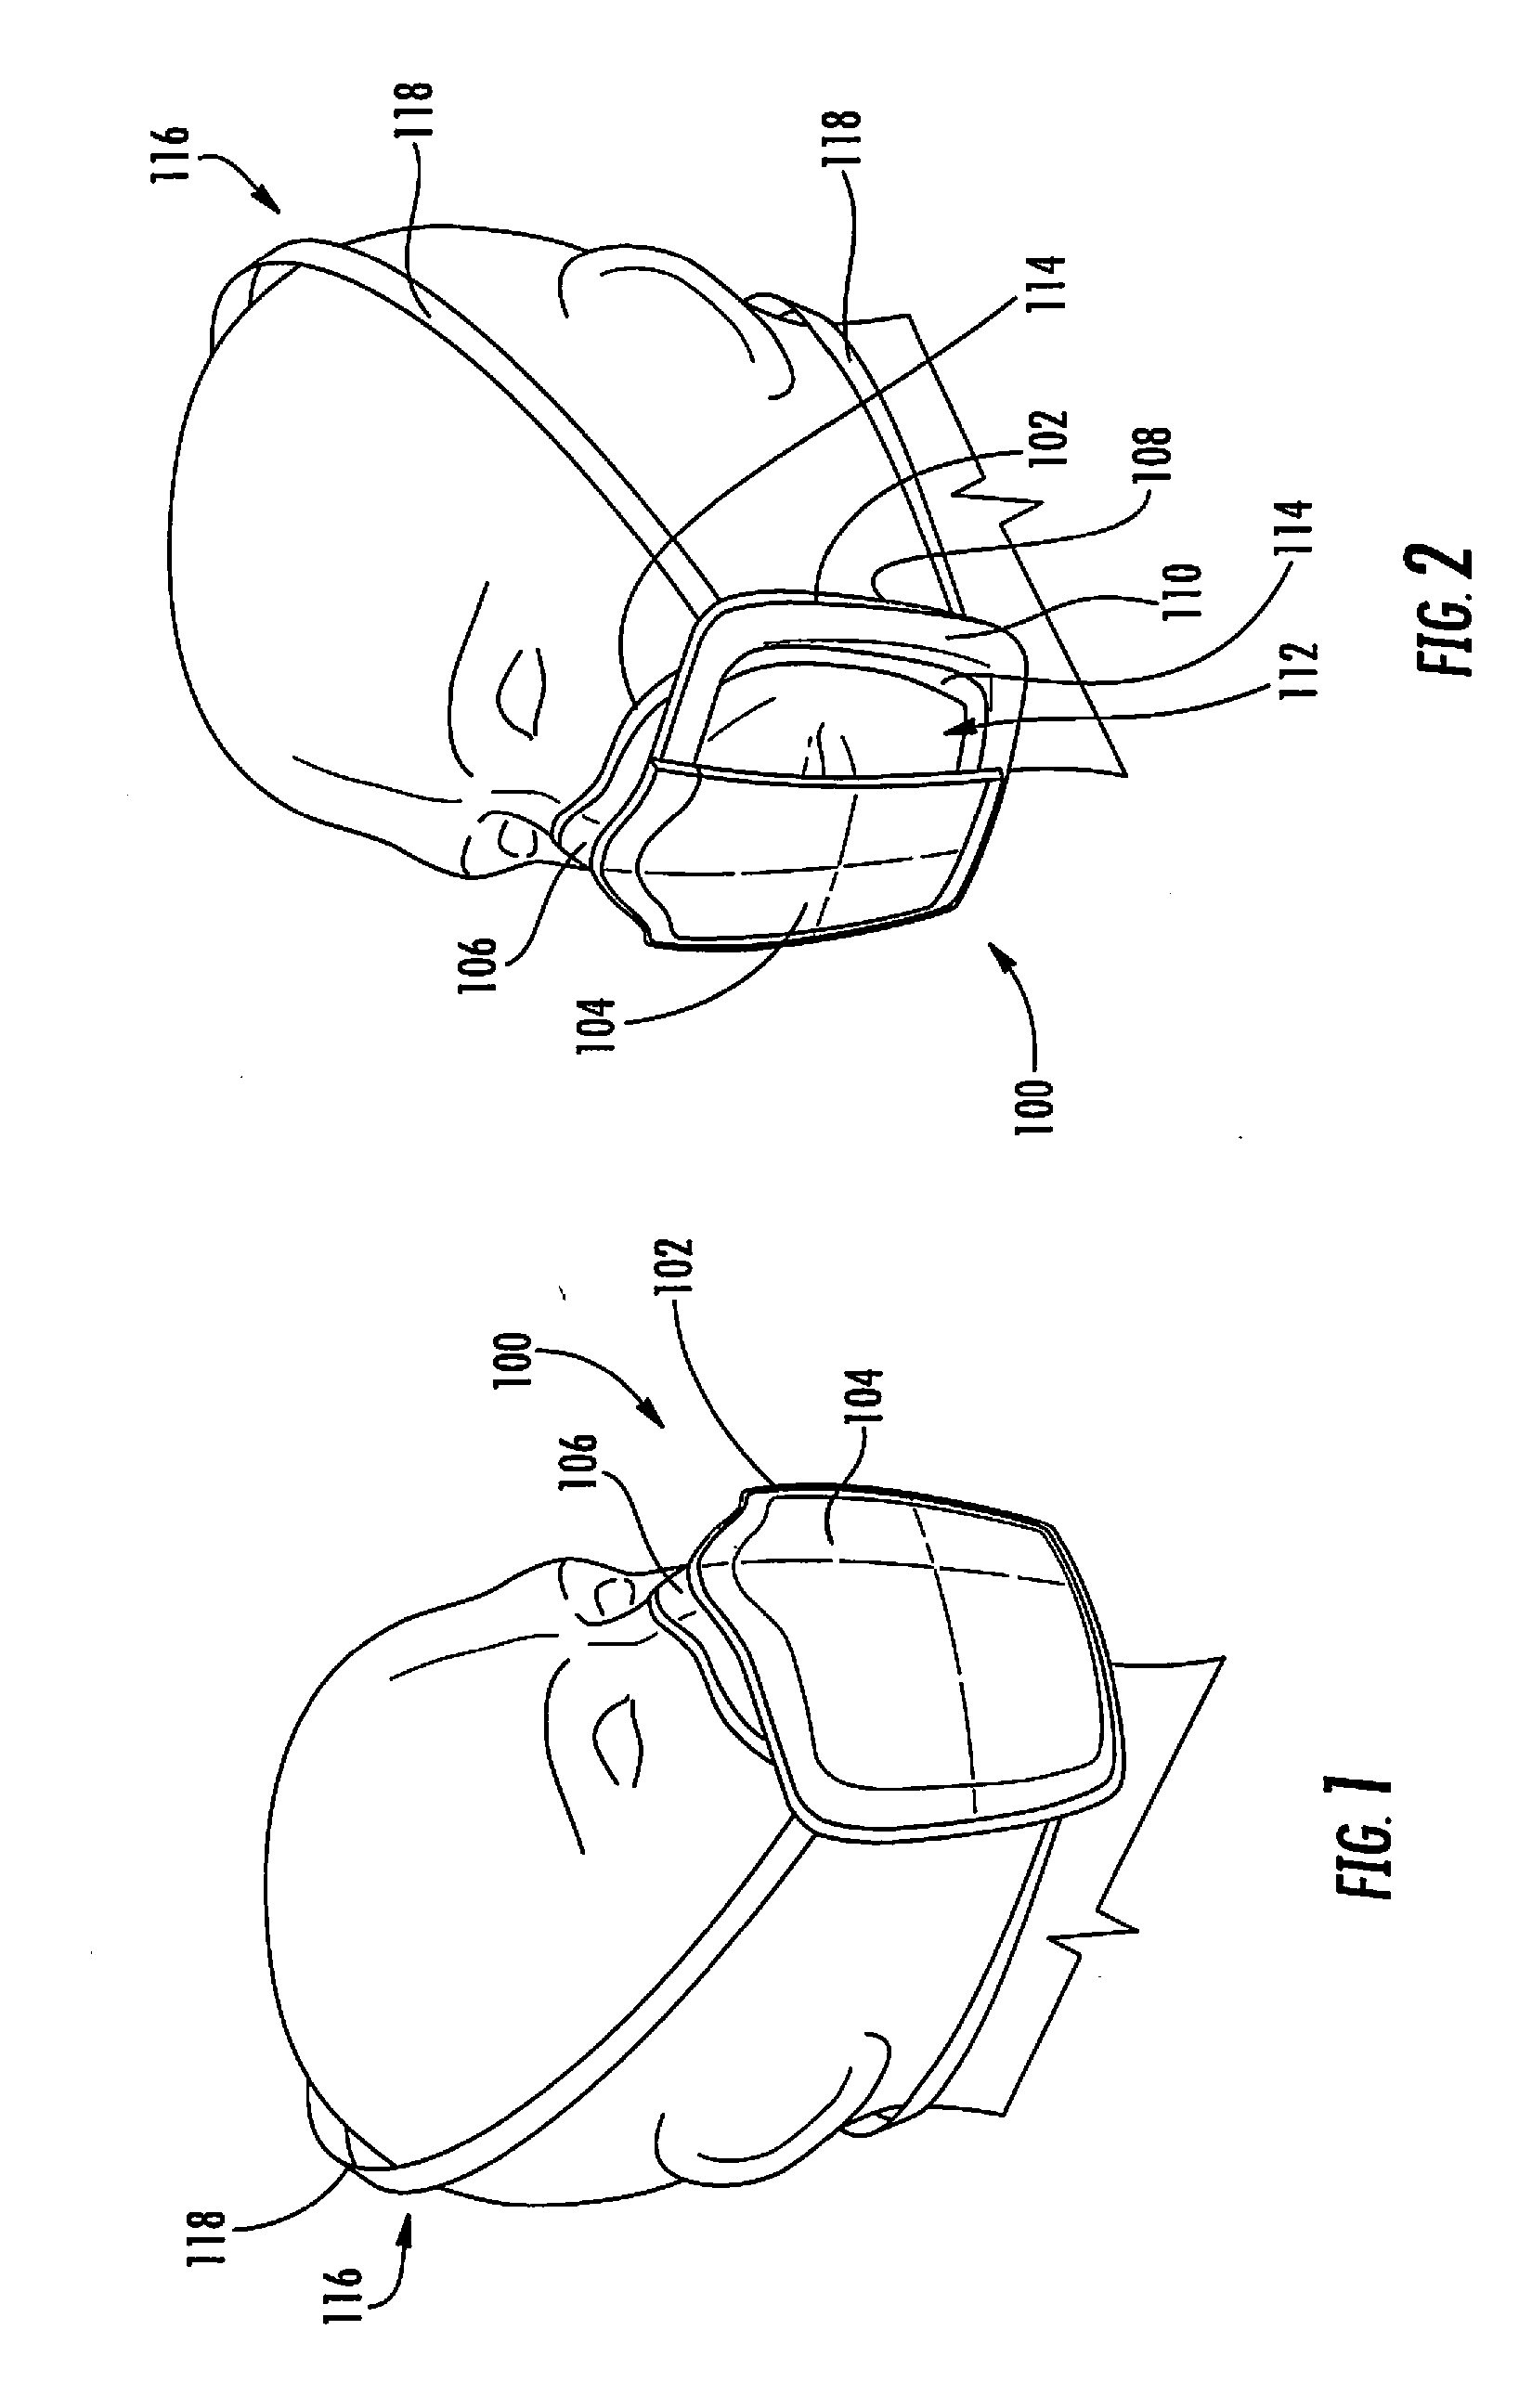 Heat deformable material for face seal